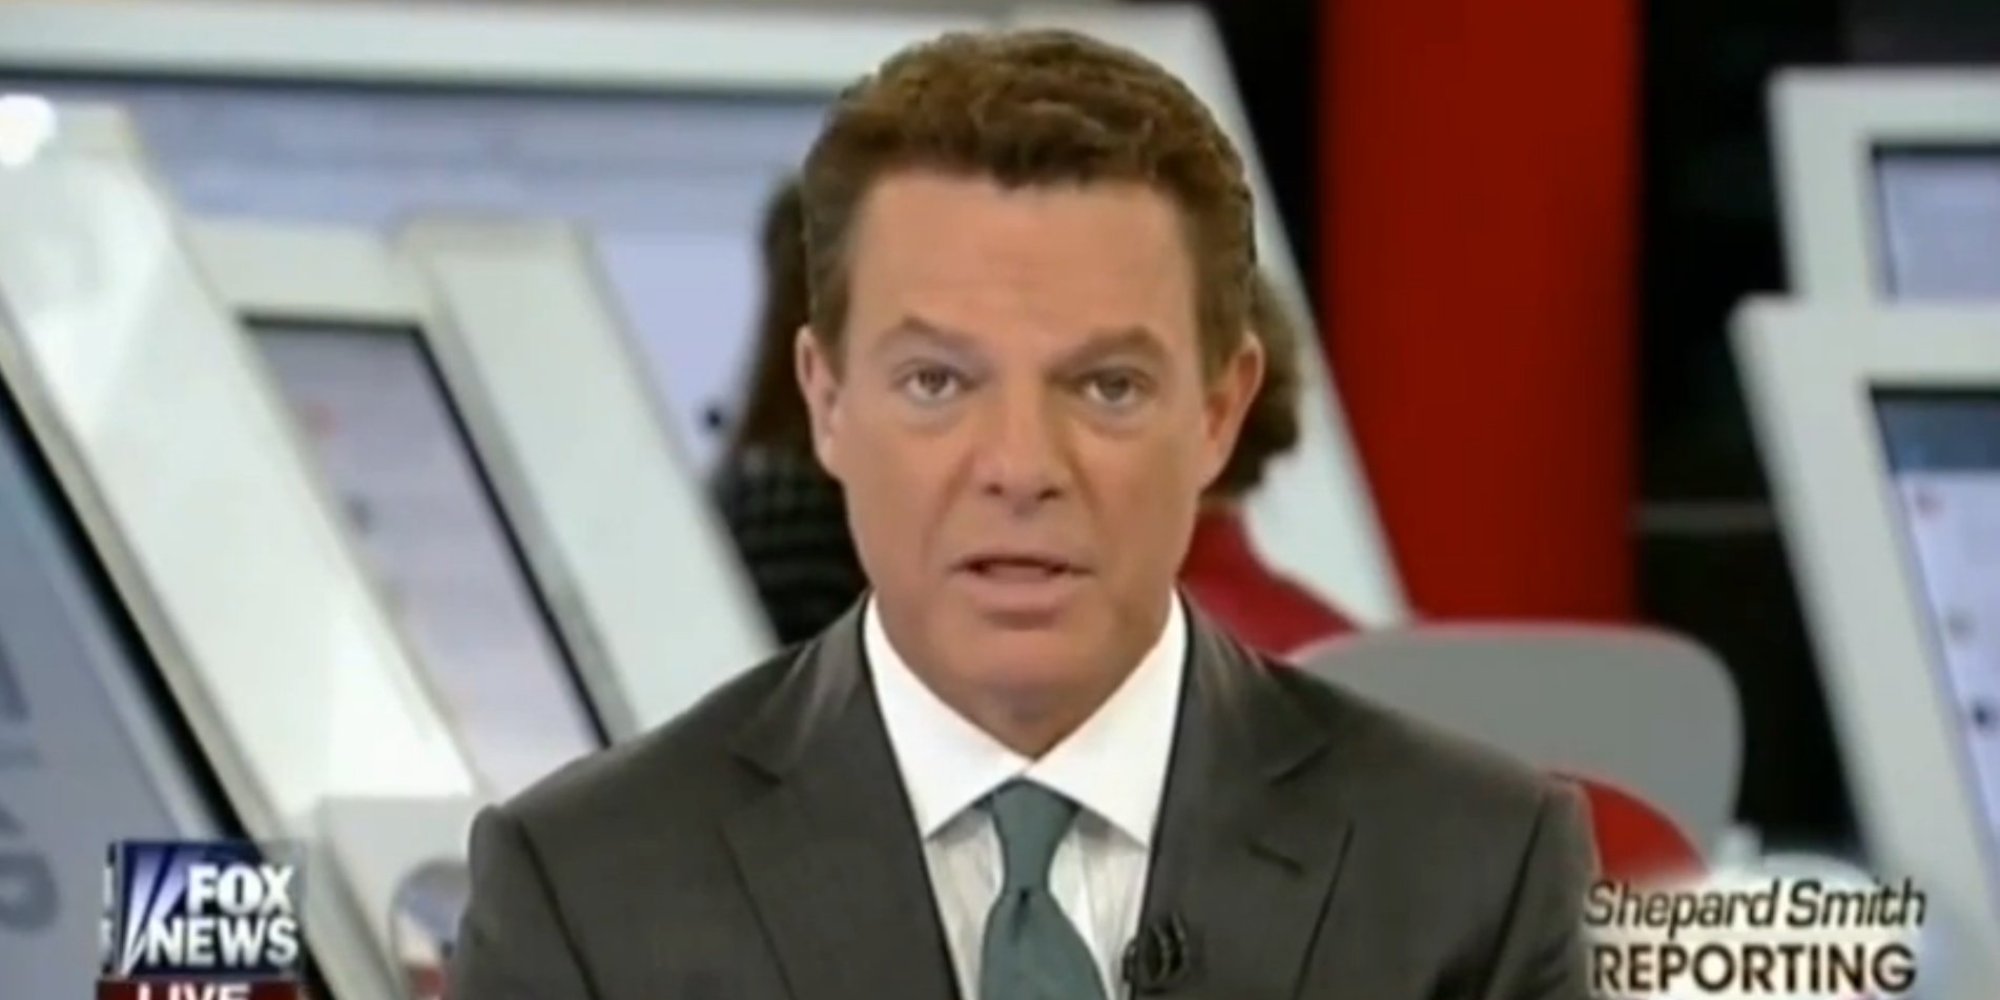 Shepard Smith: 'Do Not Listen To The Hysterical Voices' In The Media About Ebola ...